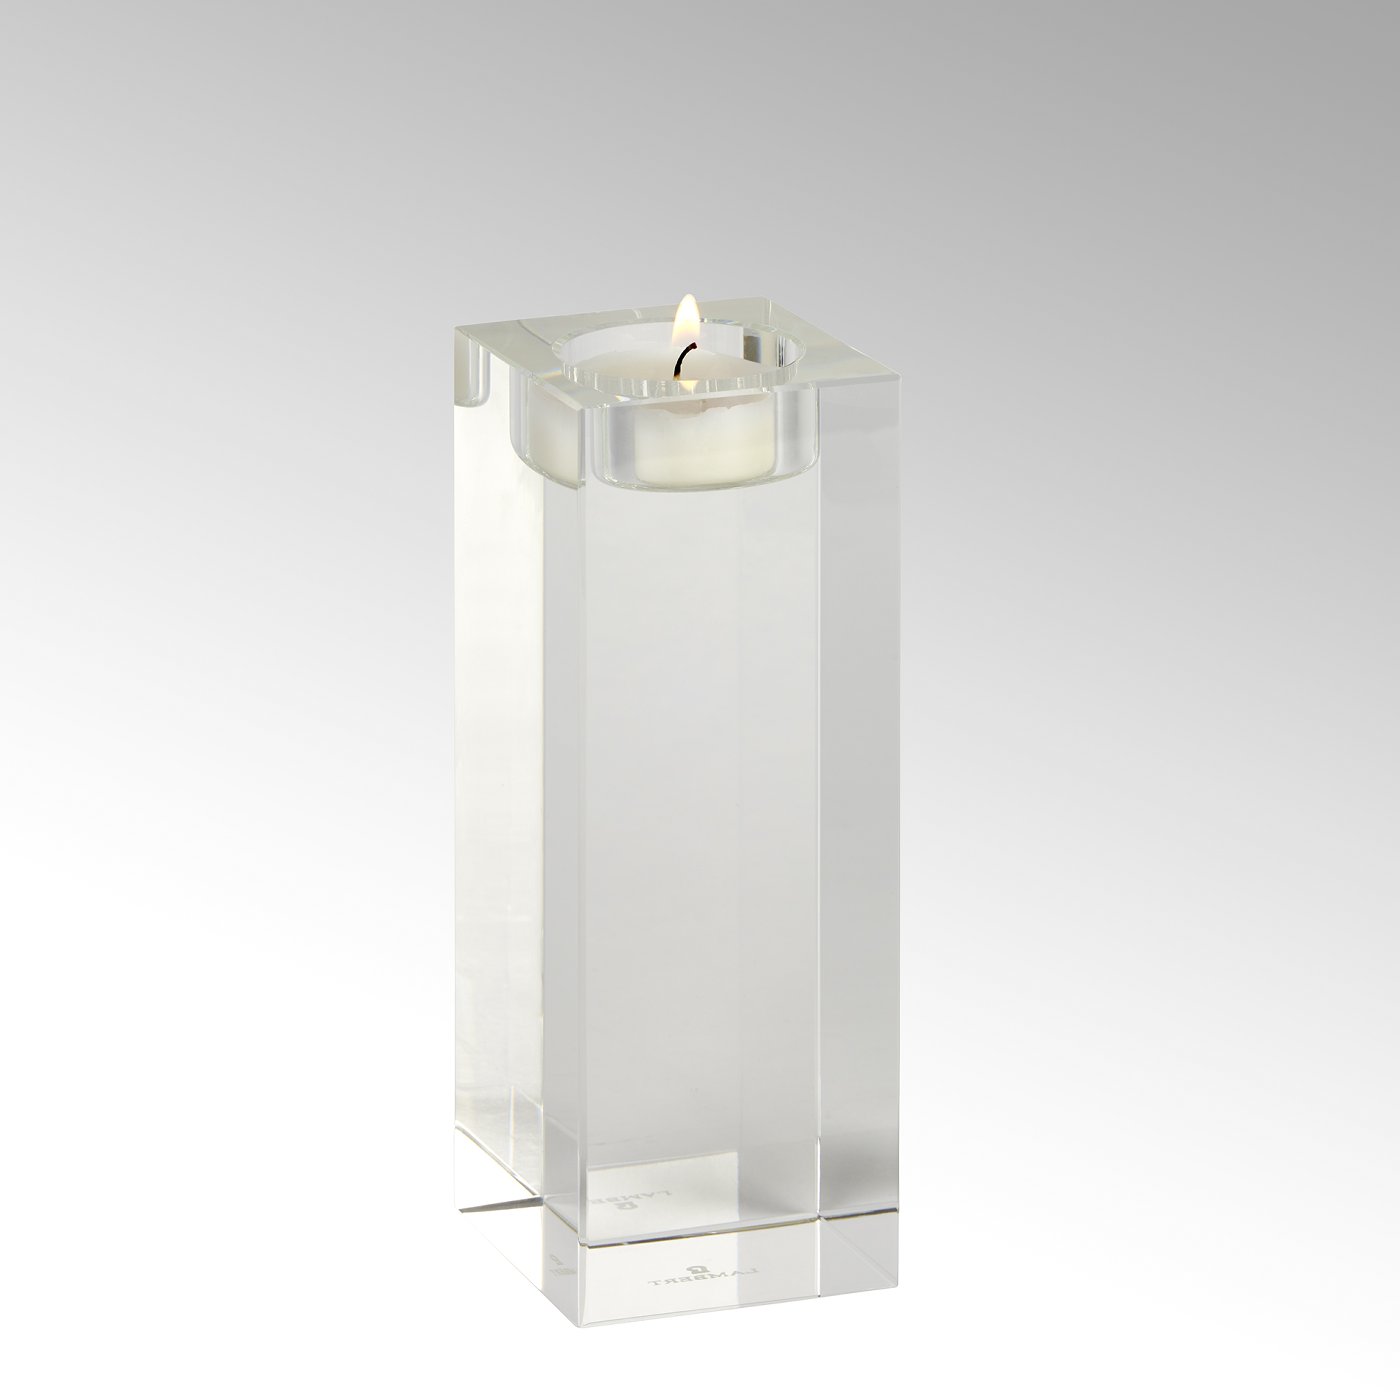 Goniaki tealight holder crystall glass, clear